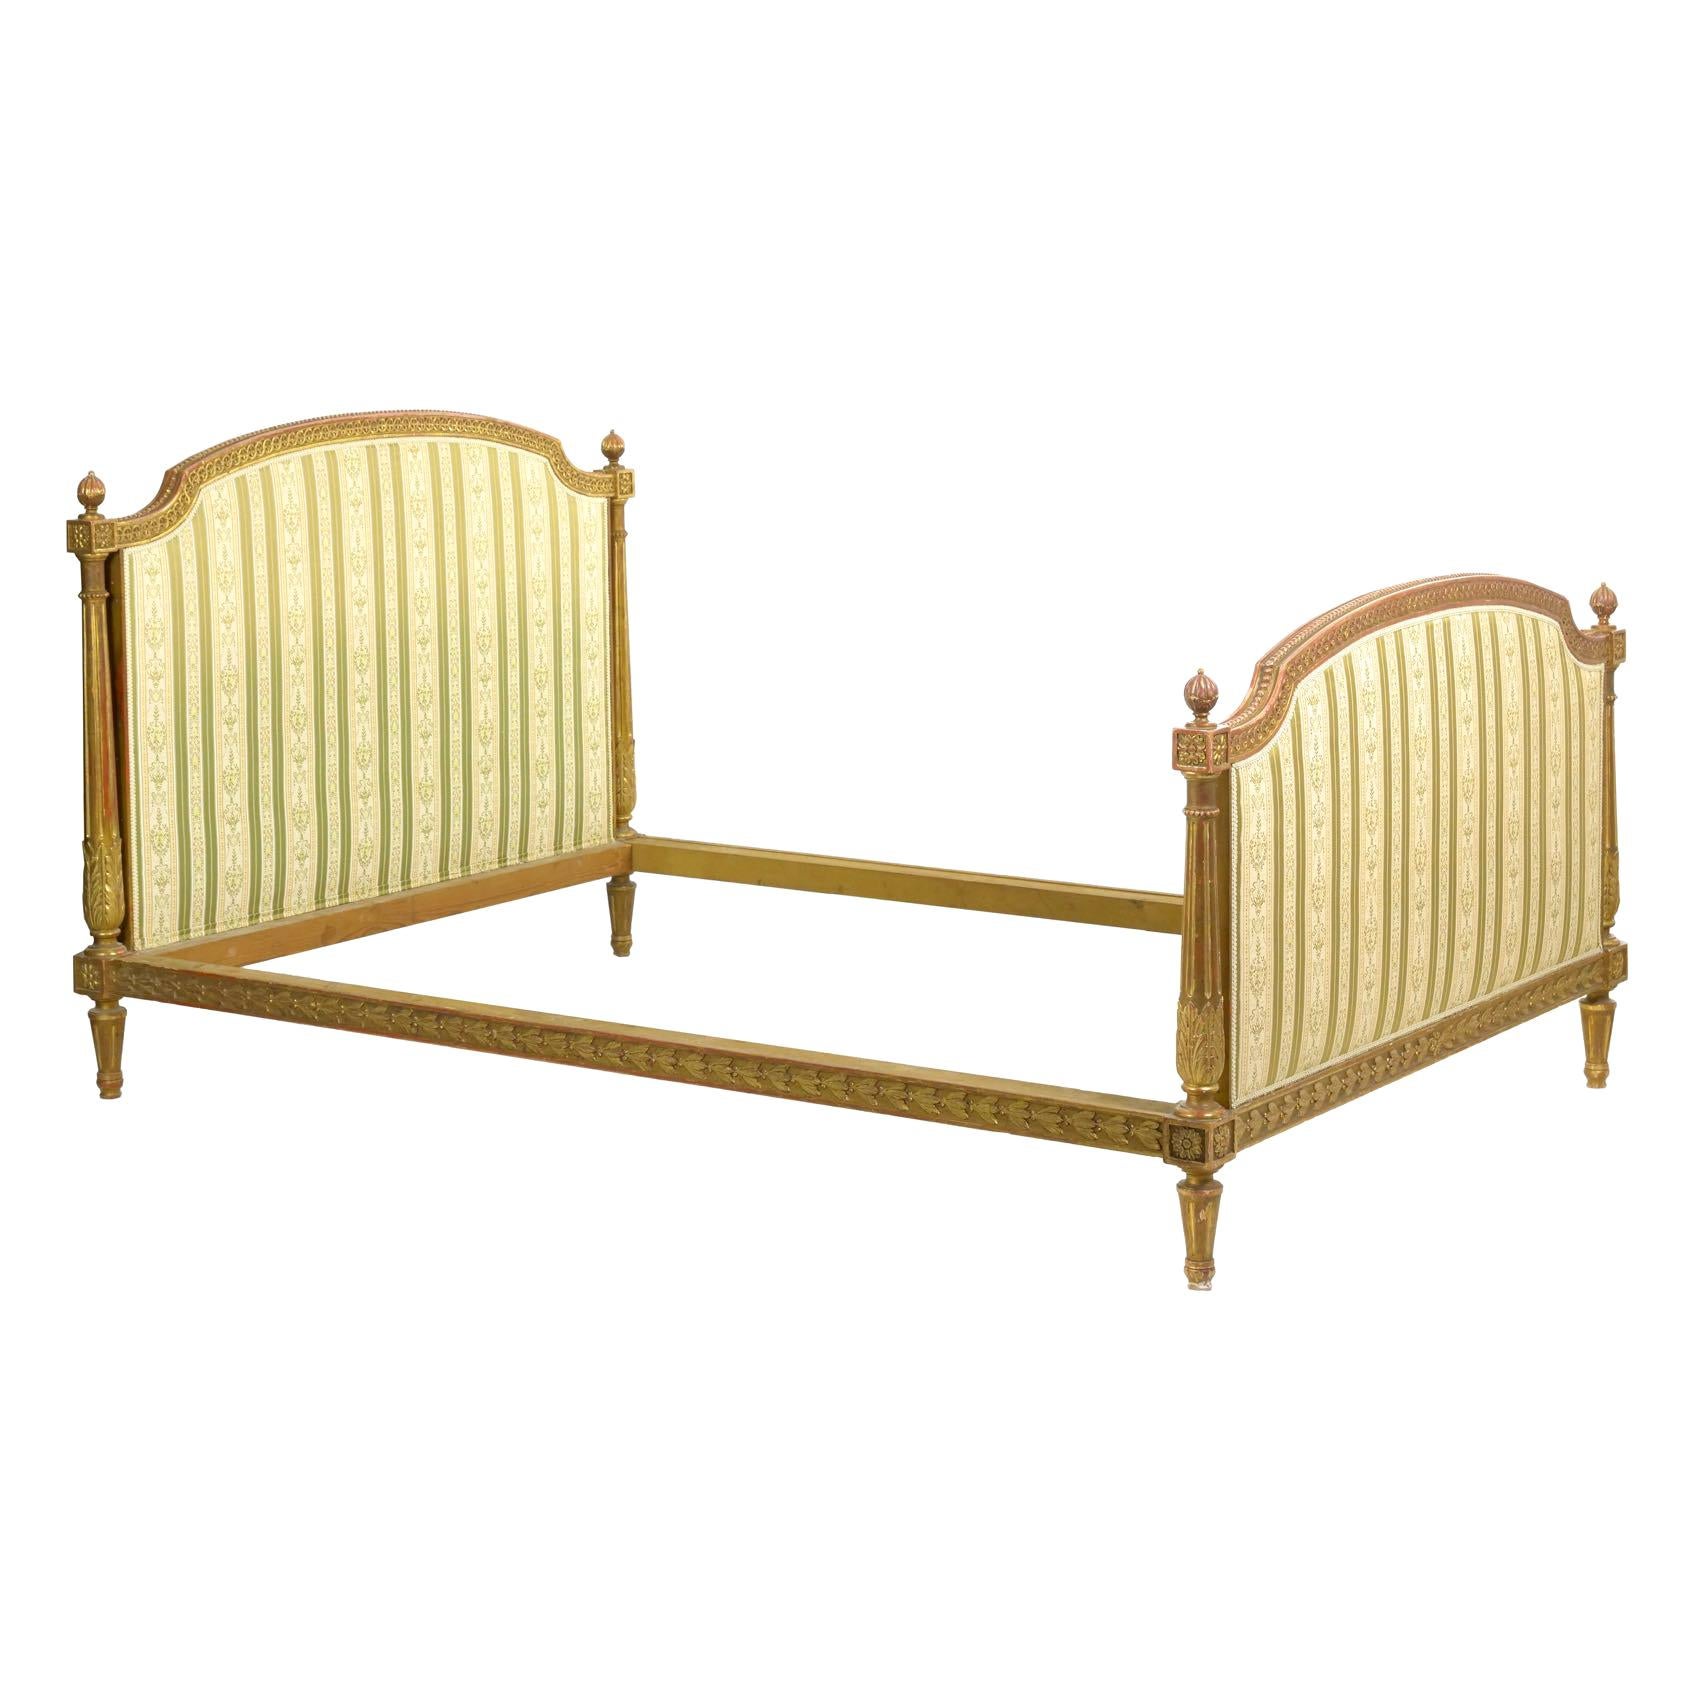 French Louis XVI Style Carved Giltwood Bed Frame with Rails, circa 1900